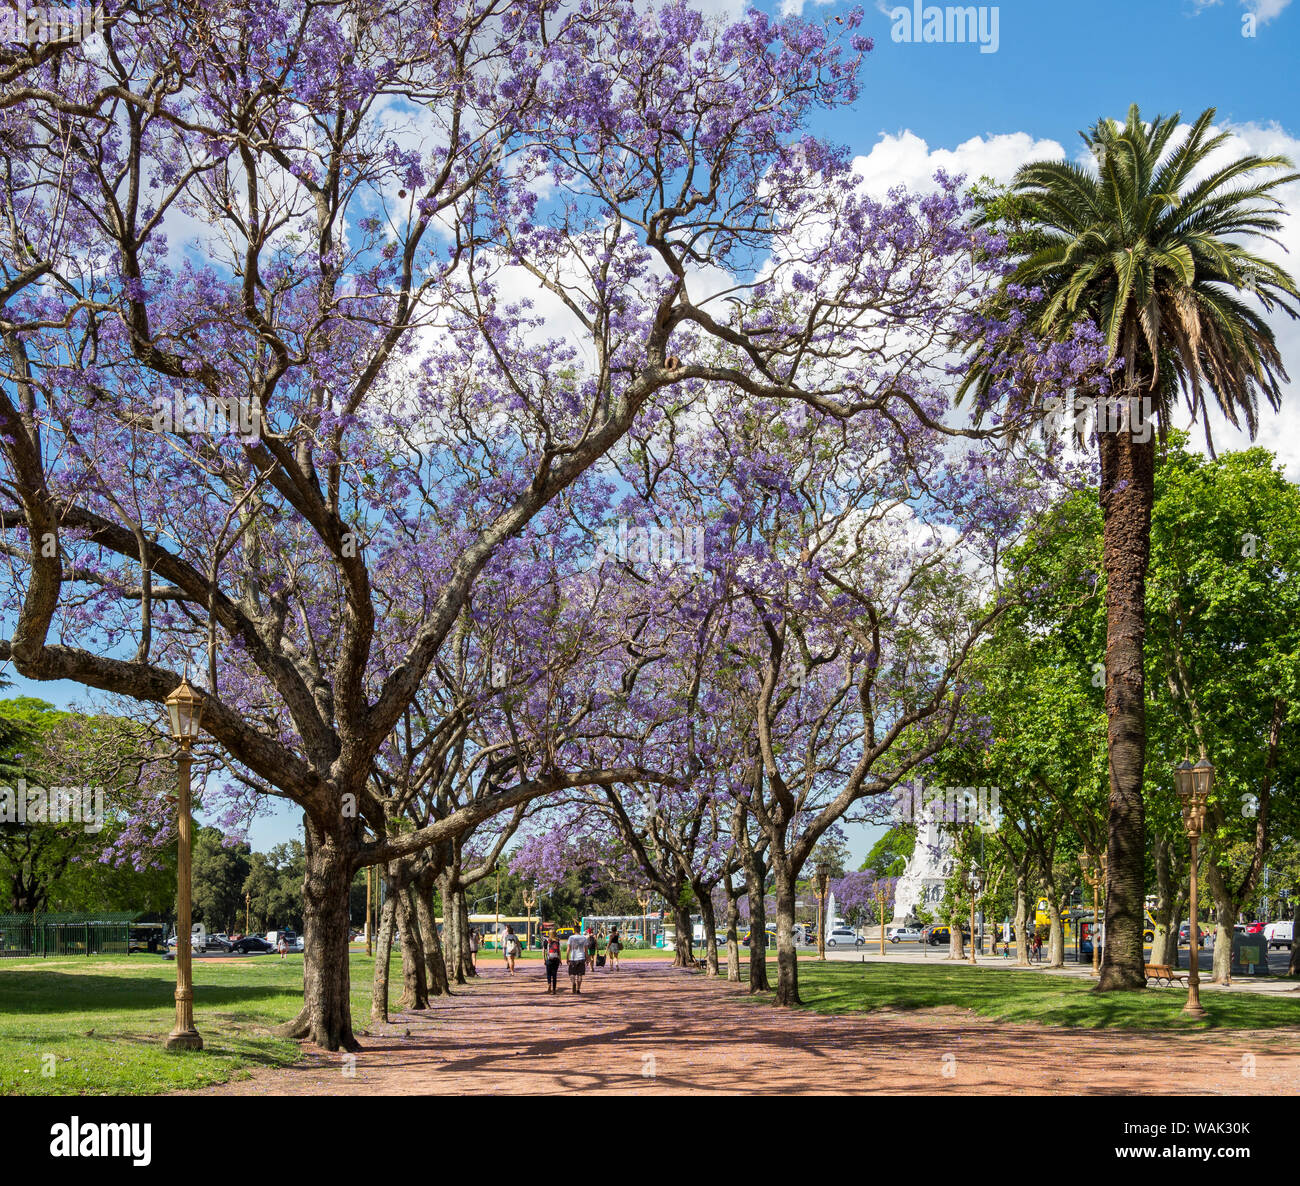 Alley with jacaranda trees in Intendente Seeber Square, Buenos Aires, Argentina. Stock Photo